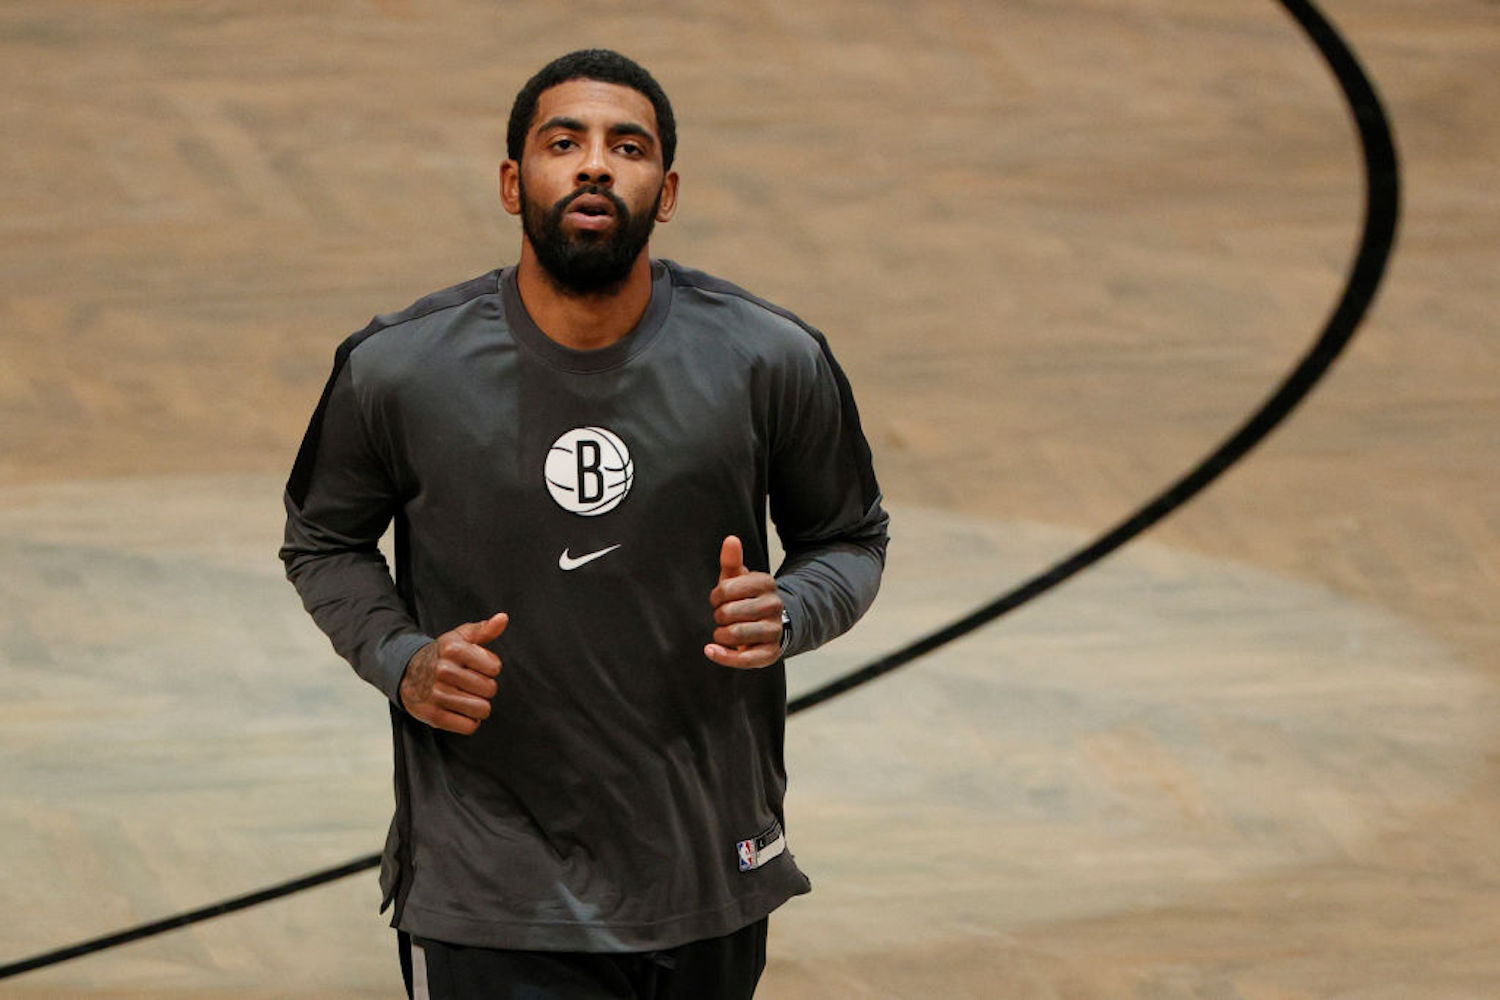 Kyrie Irving recently took a hiatus from the Brooklyn Nets for what he called 'personal reasons,' but it turns out he just wanted to party.